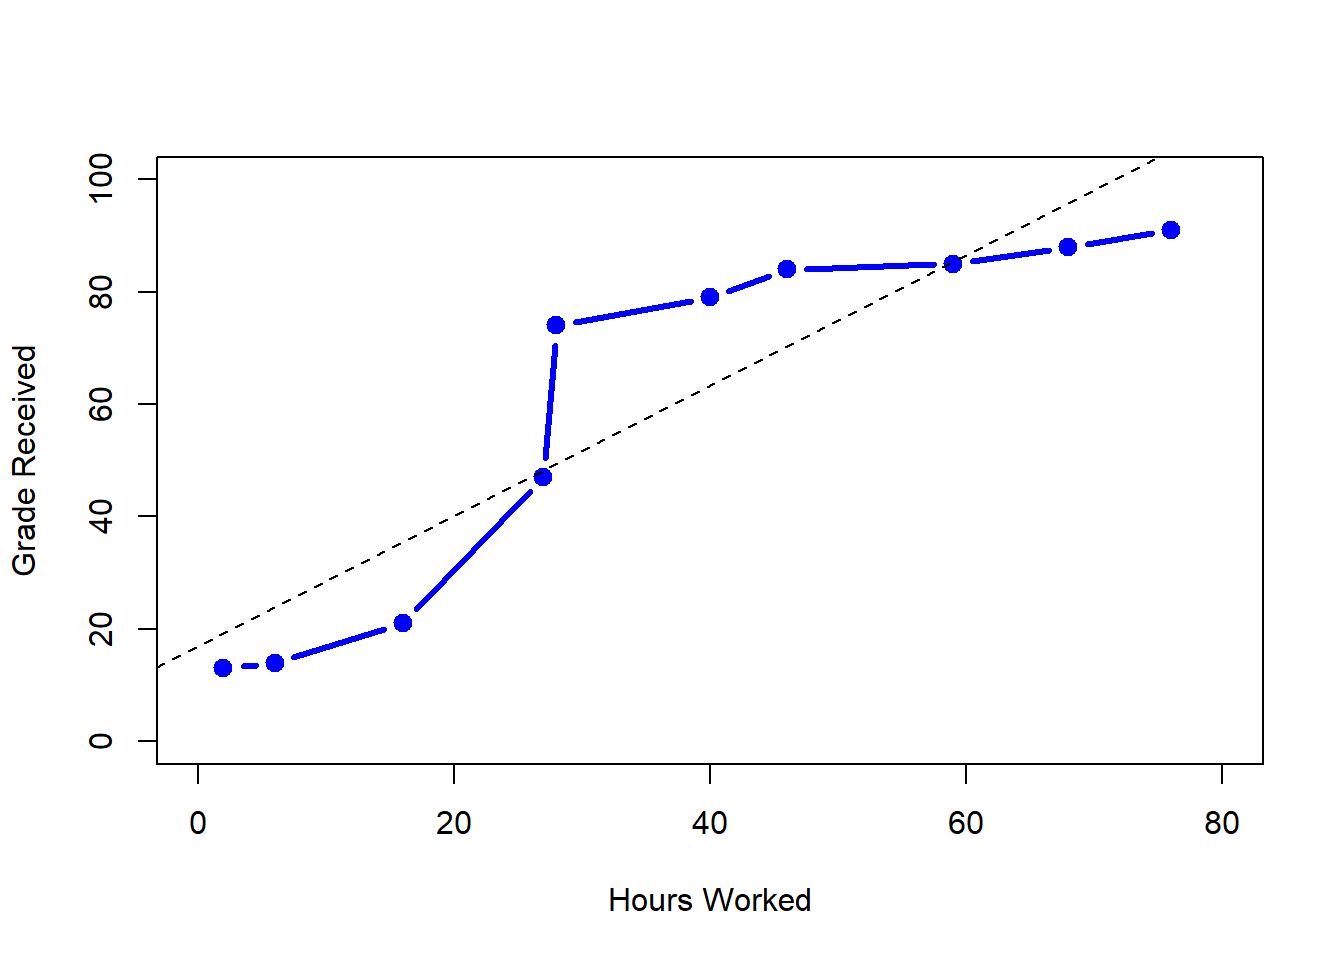 The relationship between hours worked and grade received, for a toy data set consisting of only 10 students (each circle corresponds to one student). The dashed line through the middle shows the linear relationship between the two variables. This produces a strong Pearson correlation of $r = .91$. However, the interesting thing to note here is that there's actually a perfect monotonic relationship between the two variables: in this toy example at least, increasing the hours worked always increases the grade received, as illustrated by the solid line. This is reflected in a Spearman correlation of $rho = 1$. With such a small data set, however, it's an open question as to which version better describes the actual relationship involved. 